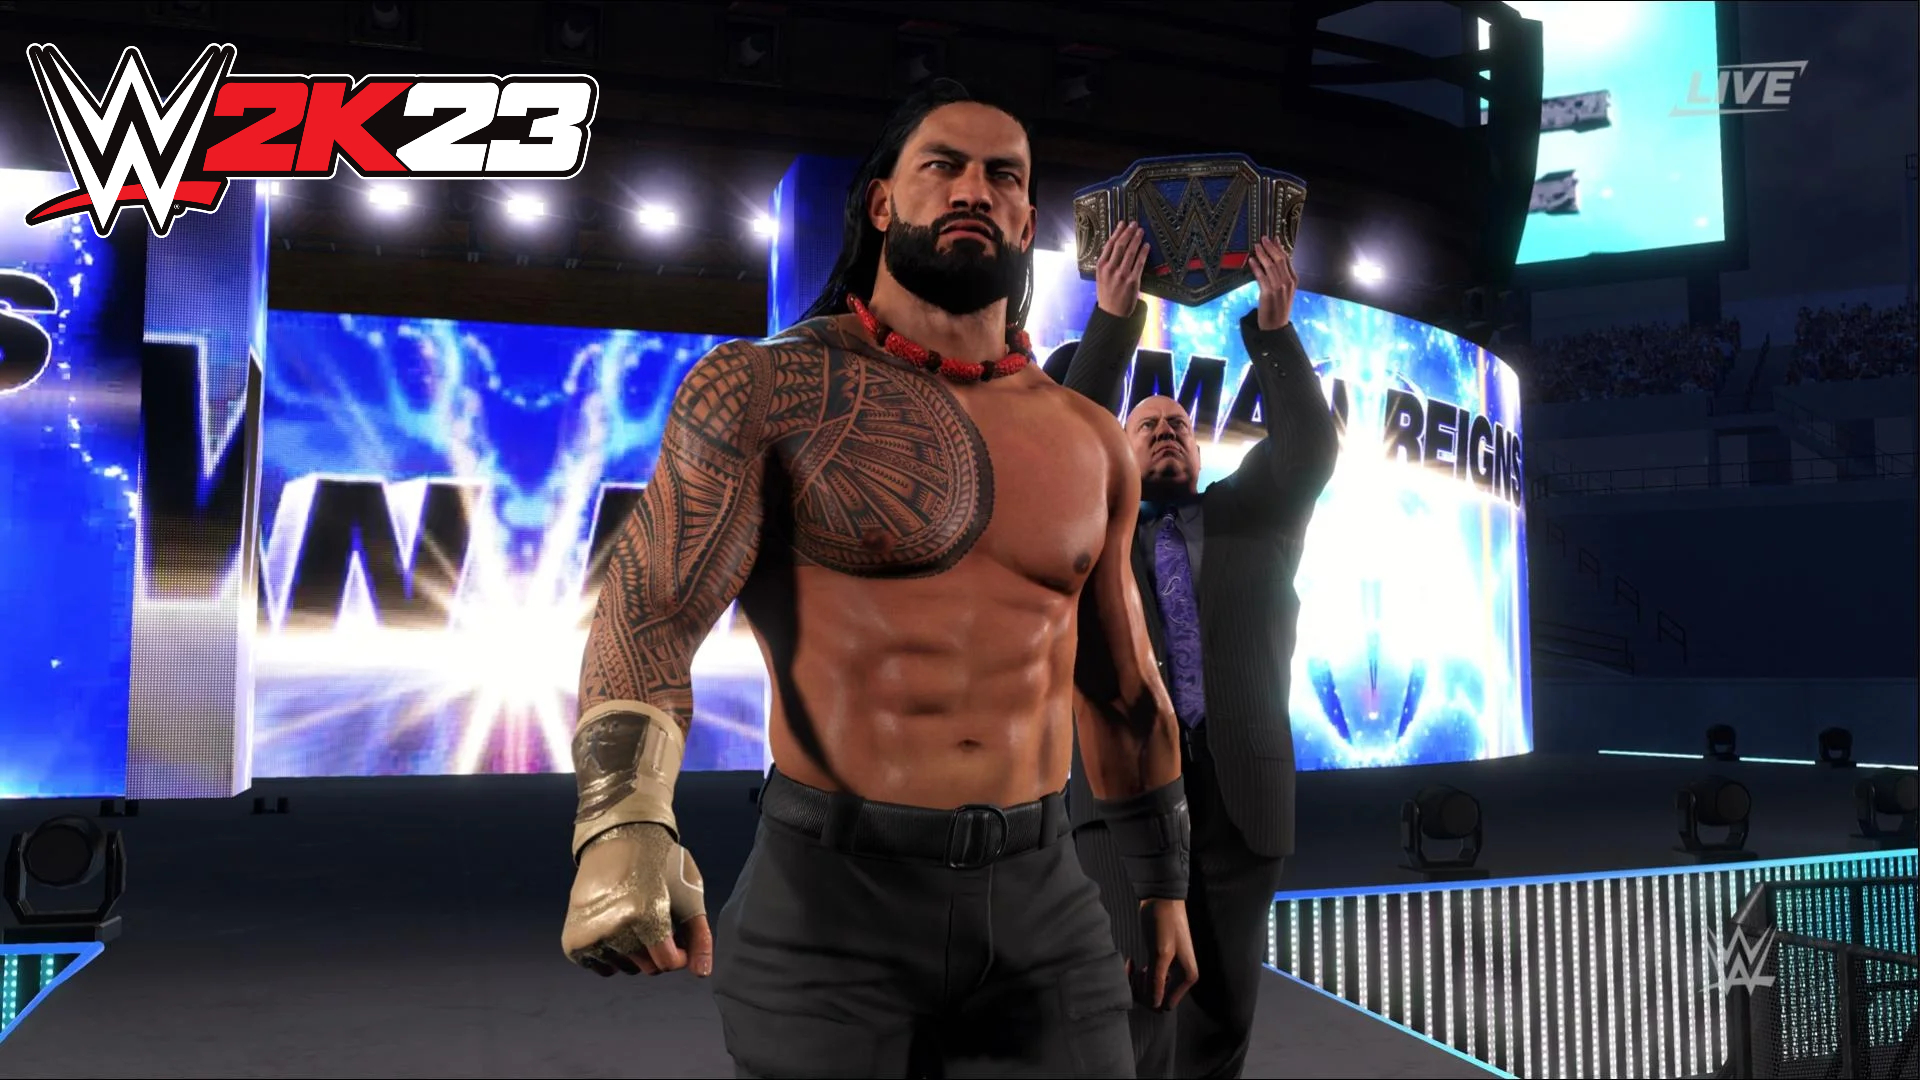 Wwe 2k23 ppsspp download